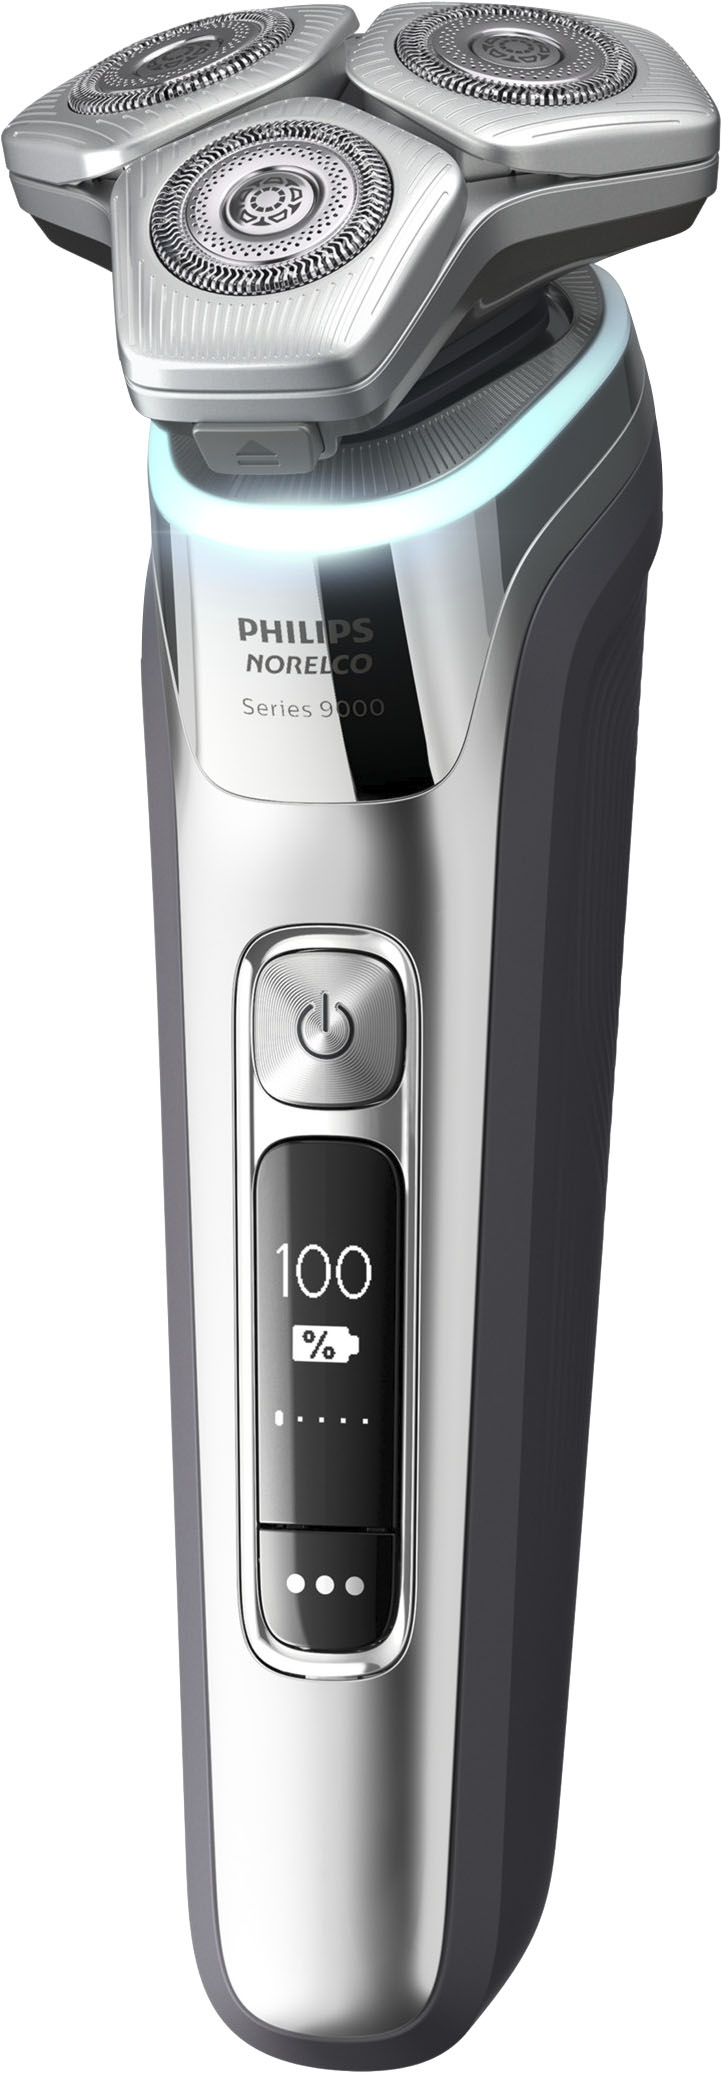 Philips Norelco 9500 Rechargeable Wet/Dry Electric Shaver with Quick Clean, Travel  Case, and Pop up Trimmer Silver S9985/84 Best Buy